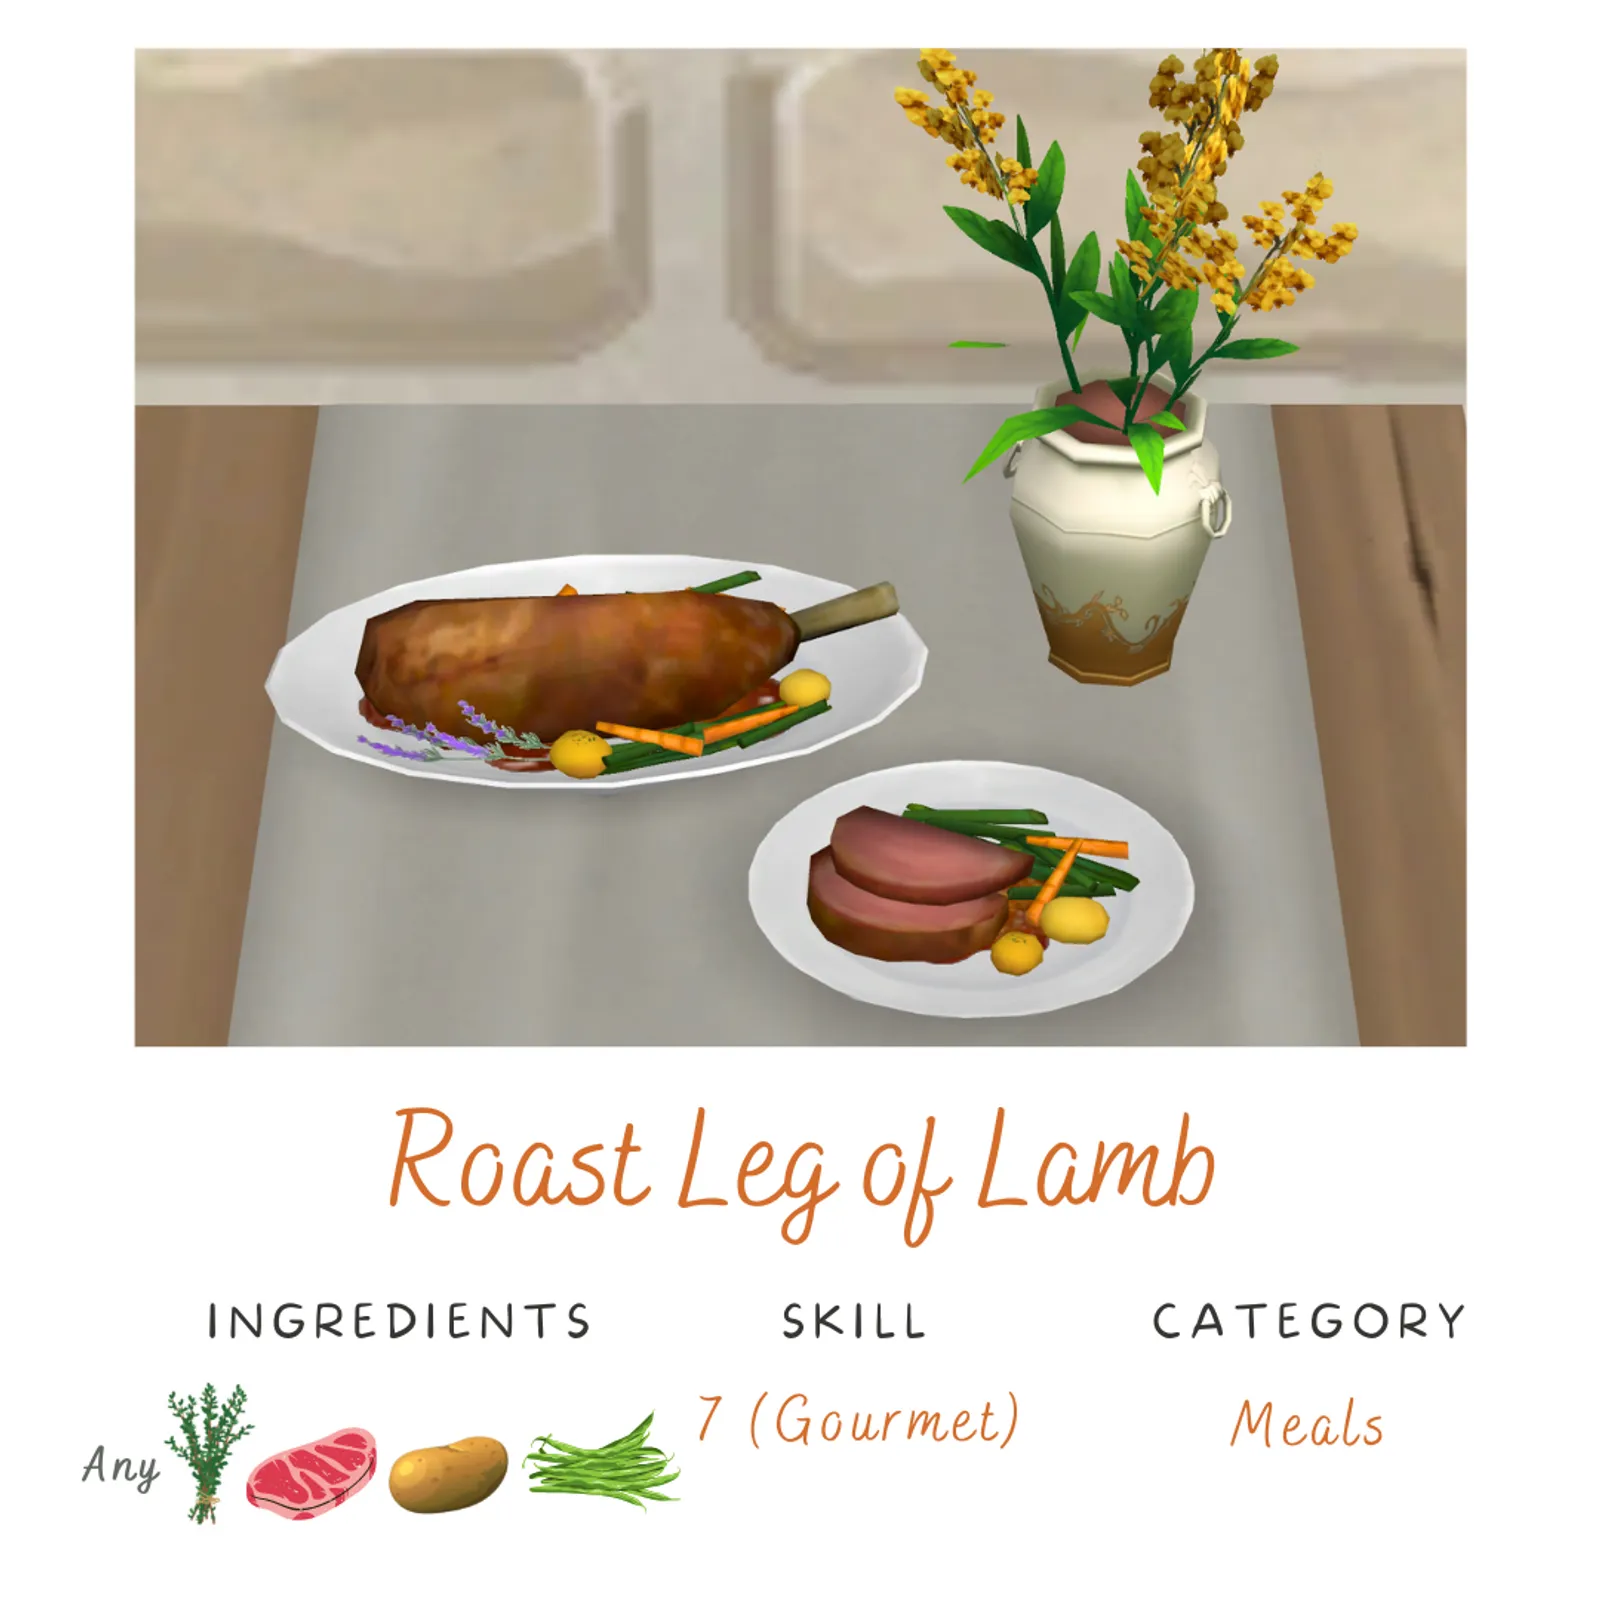 Roast Leg of Lamb - Easter/Spring Day Meal!